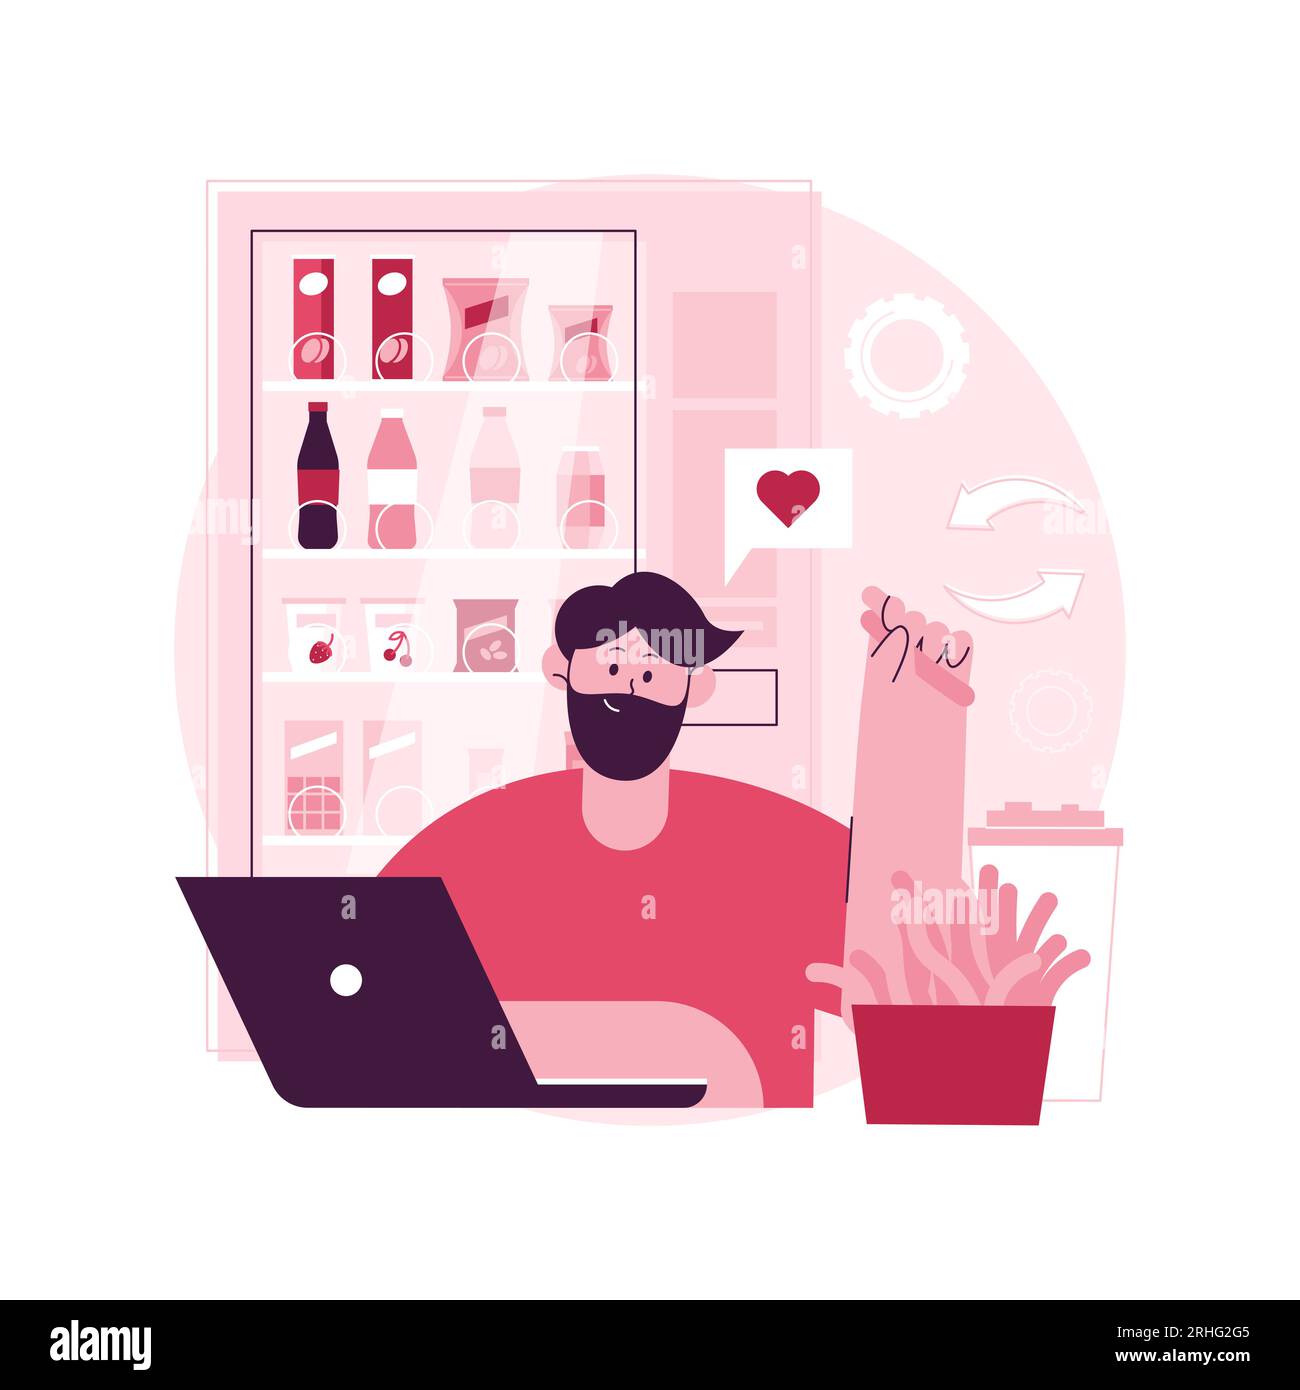 Snacking non-stop abstract concept vector illustration. Mindless snacking, junk food, non-stop eating while working, reduce cholesterol use, diet and nutrition, addictive habit abstract metaphor. Stock Vector